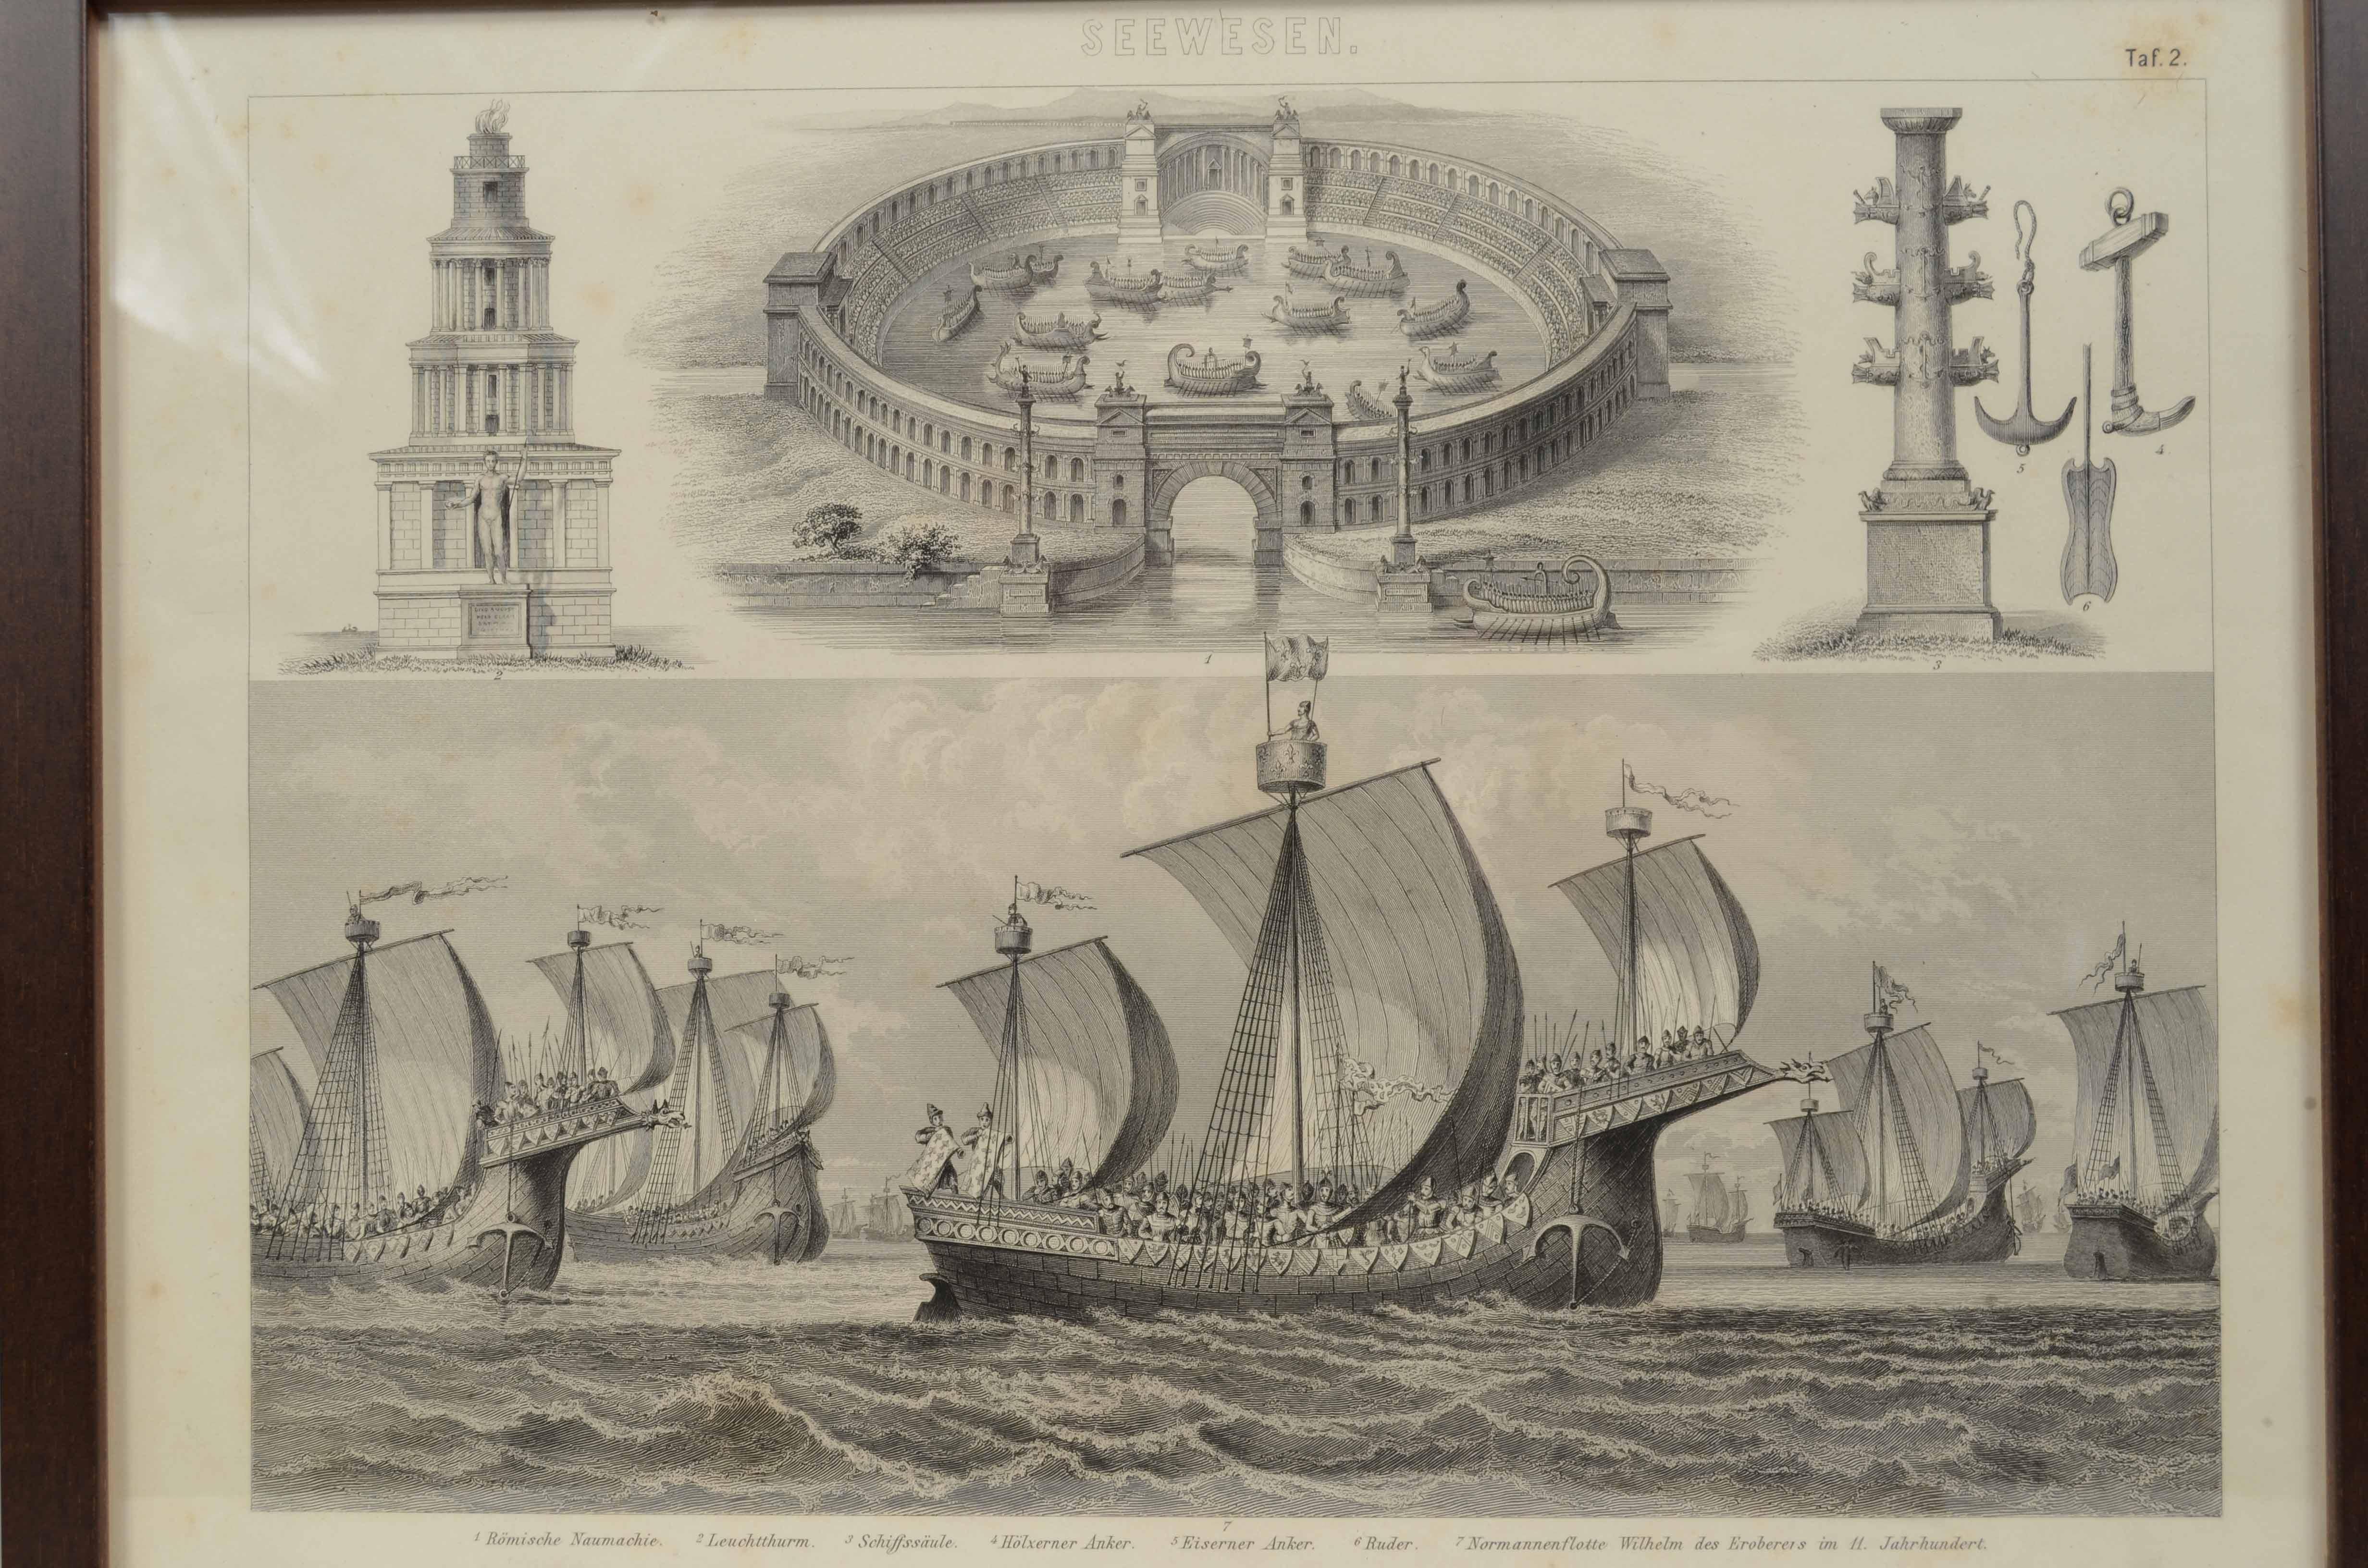 Print depicting  plate No. 2 from engraving on steel plate and taken from the Illustrated Atlas published by F.A.  Brockhaus, in Leipzig 1869-1875 the iconographic encyclopedia of the sciences and arts. This is a printing pertaining to  to naval